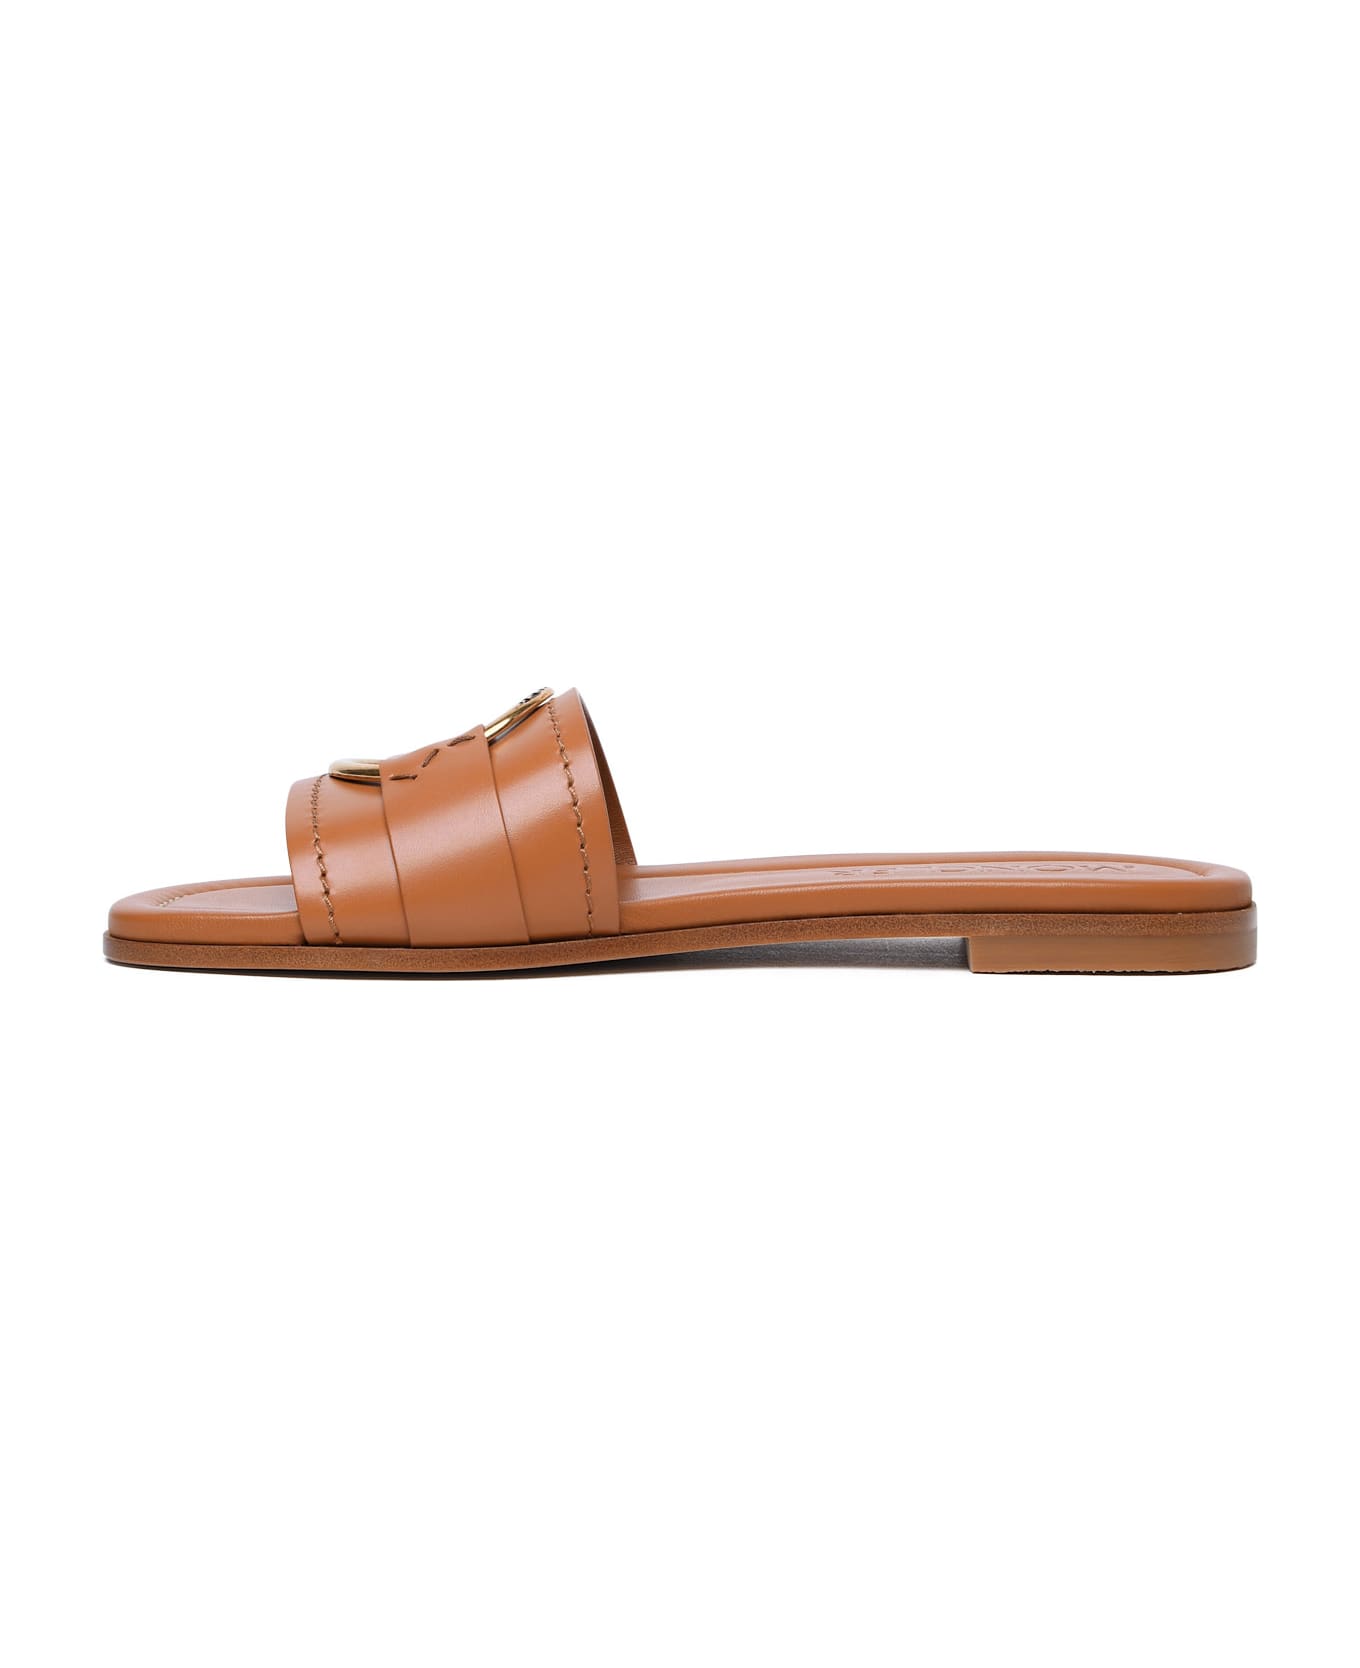 Moncler 'bell' Caramel Leather Slippers - Beige